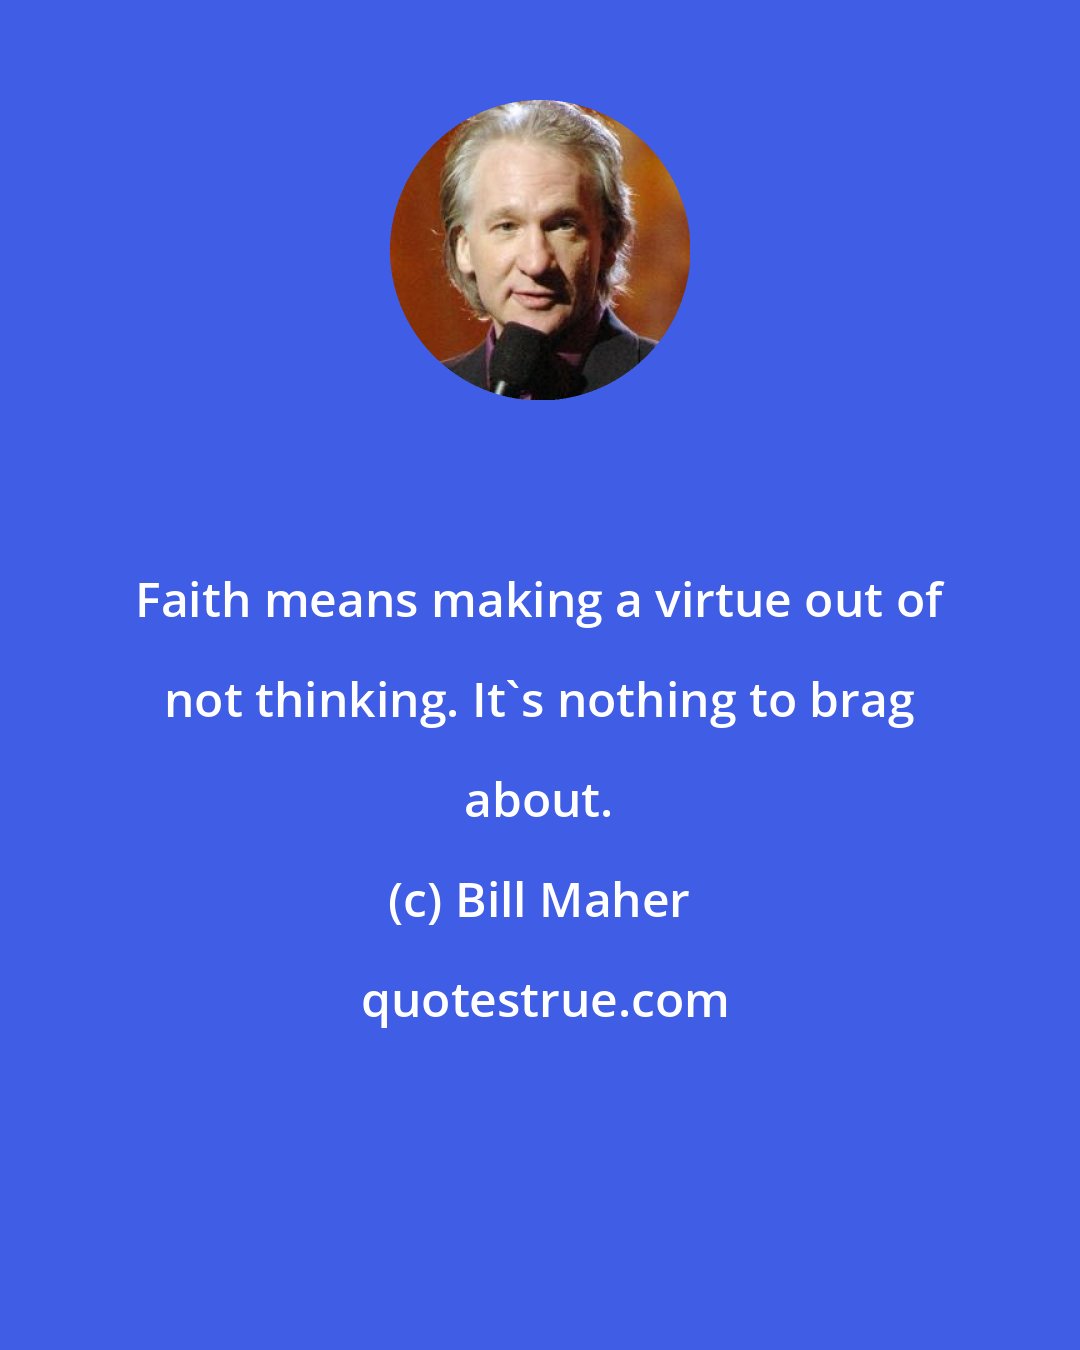 Bill Maher: Faith means making a virtue out of not thinking. It's nothing to brag about.